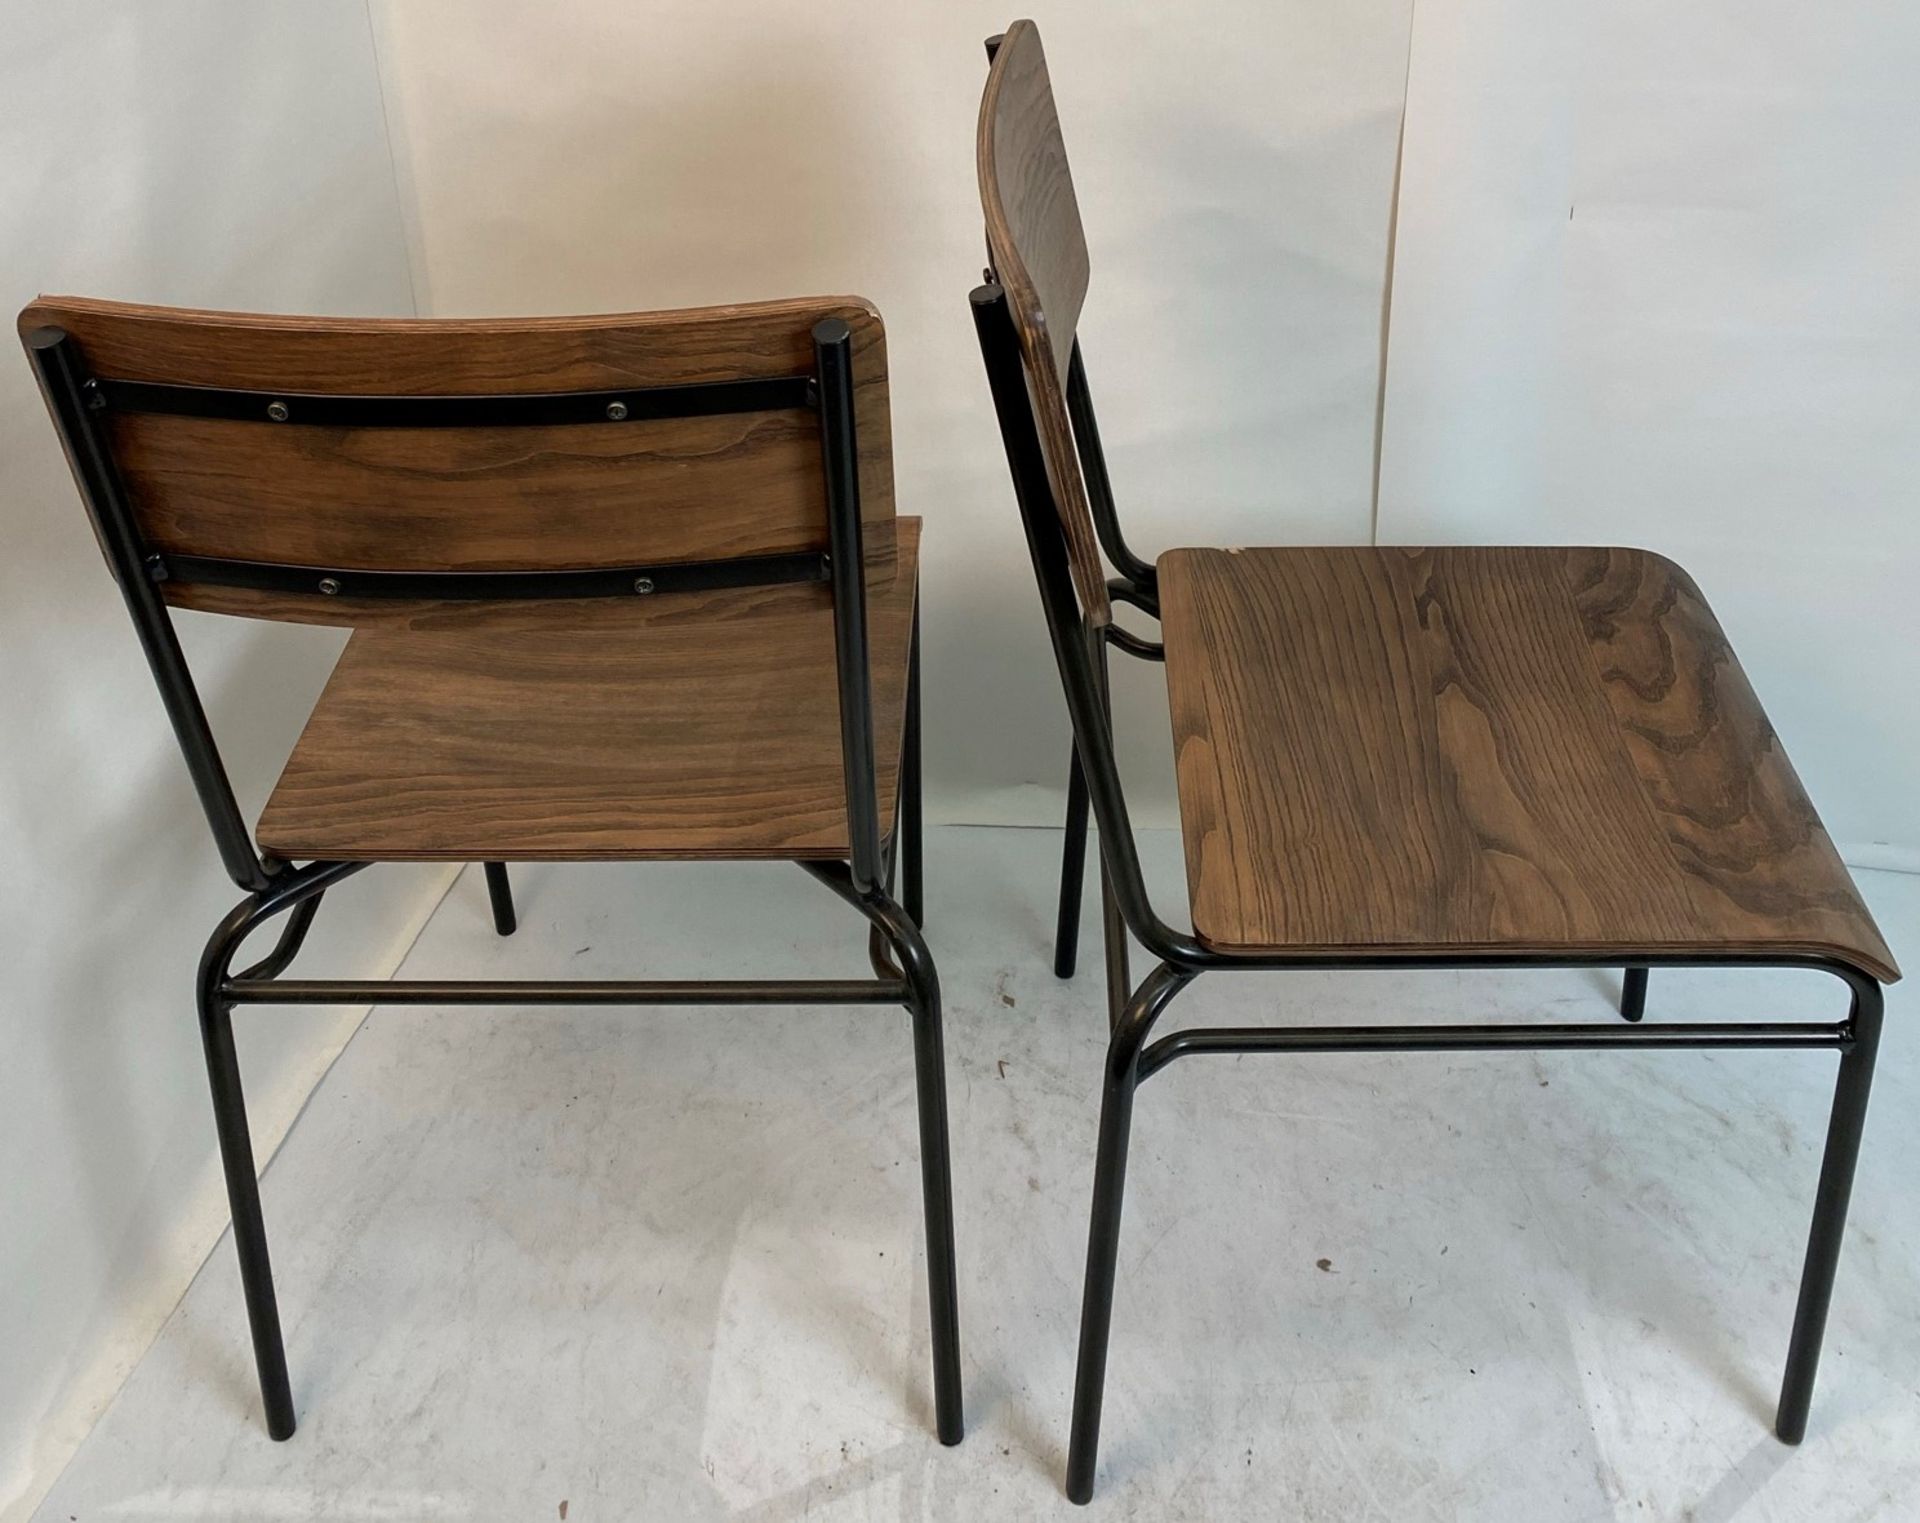 2 x Dark wood effect stacking chairs with black metal frames - Pleae note slight chip to rear right - Image 4 of 4